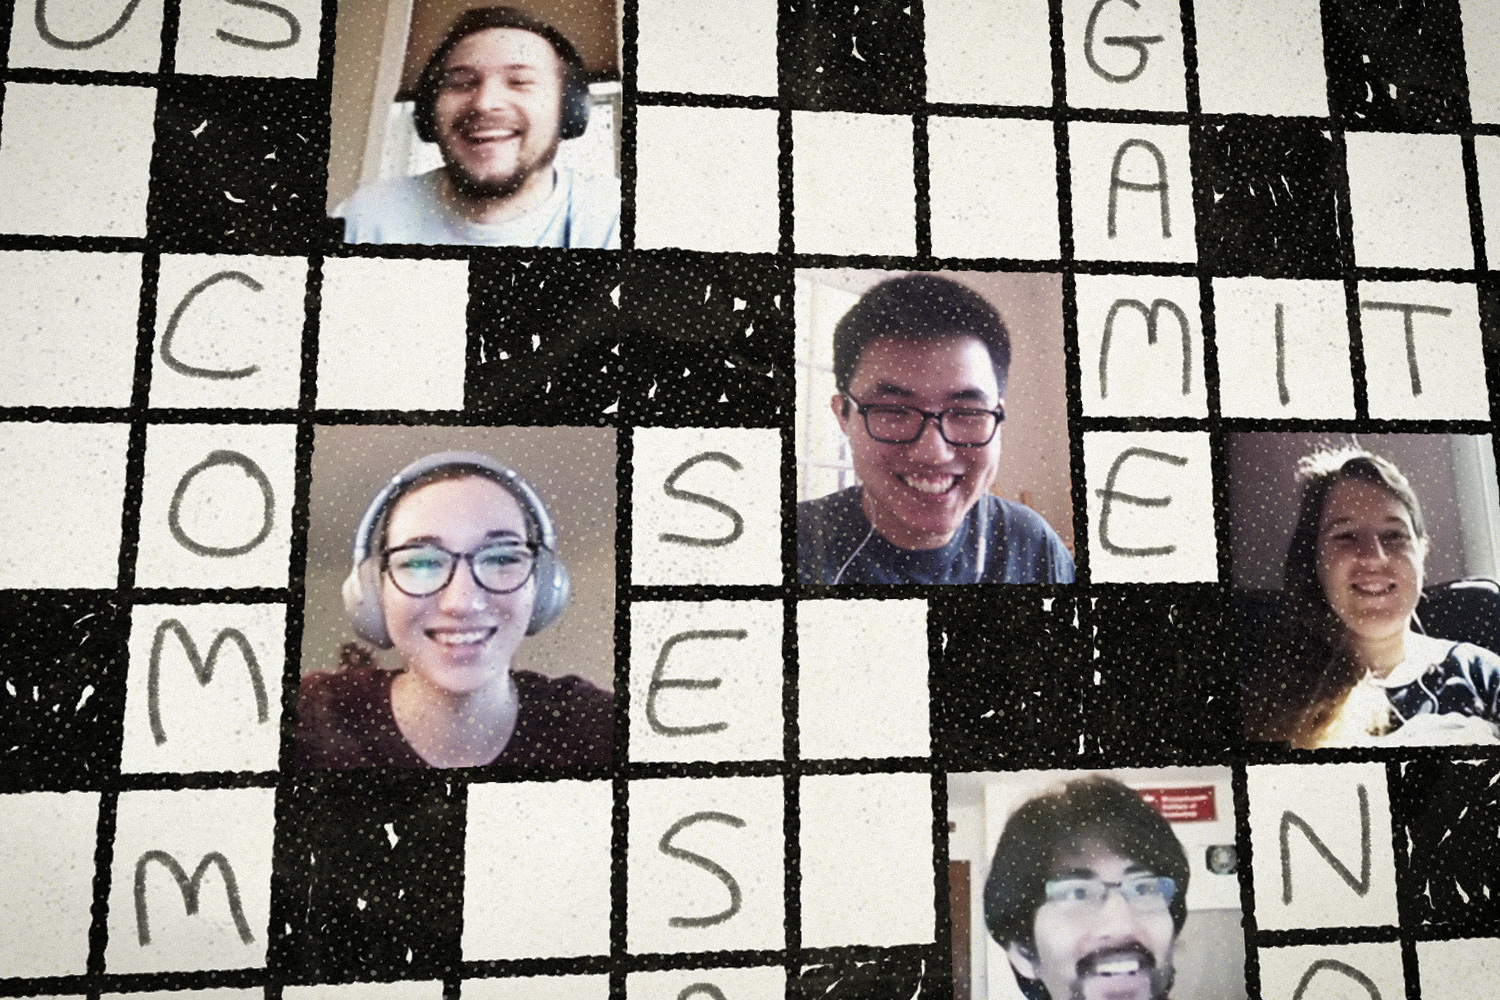 Stylized crossword puzzle with student faces in some boxes